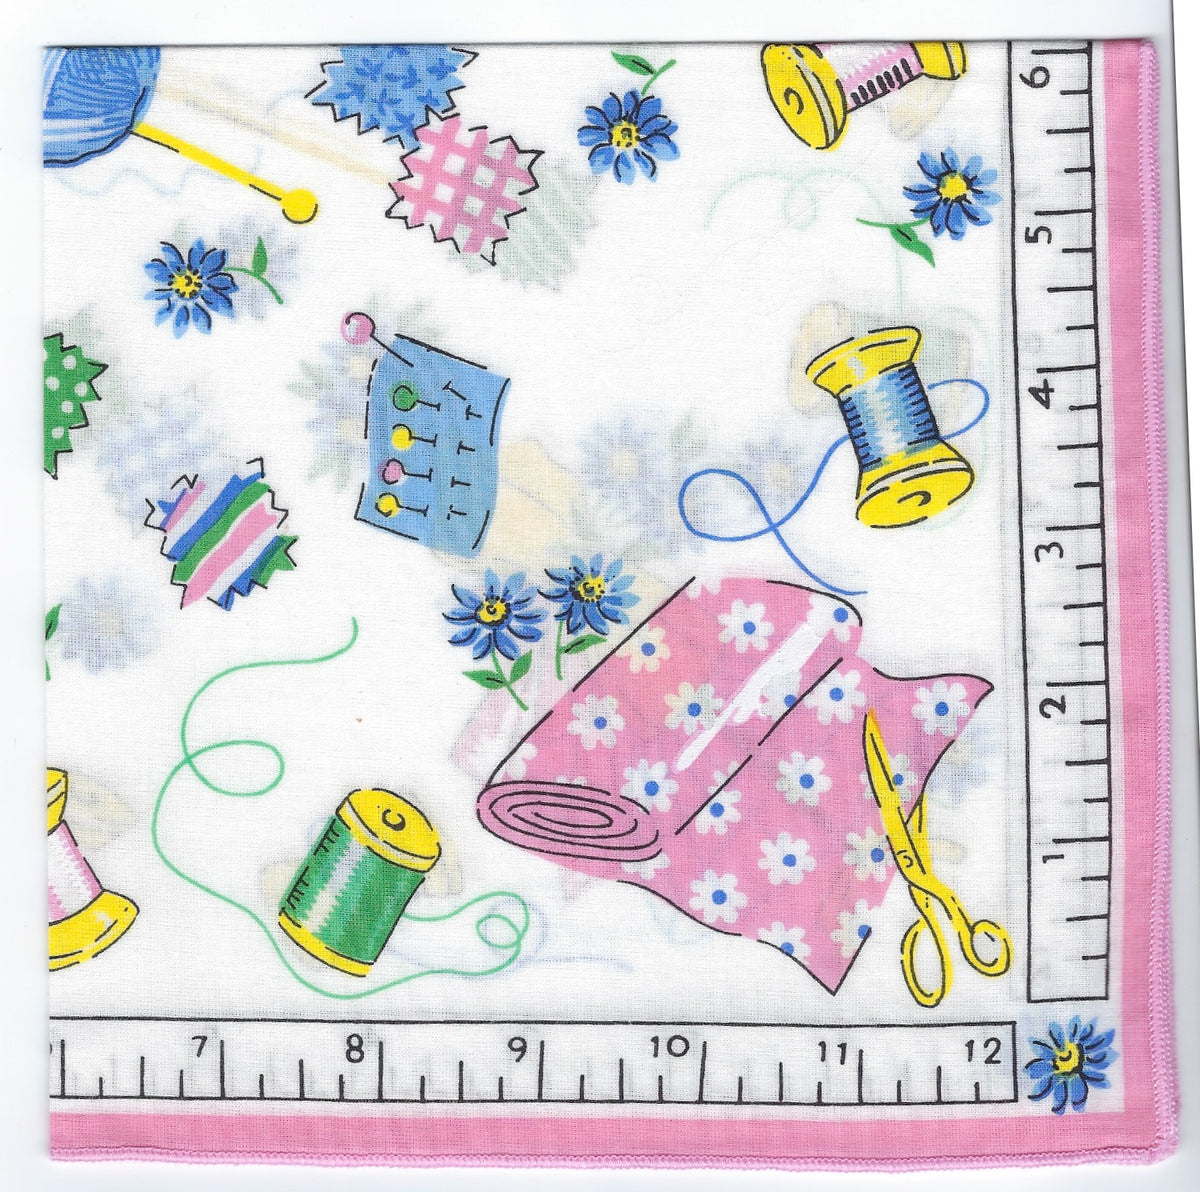 A colorful fabric pattern featuring sewing and crafting motifs such as thread spools, scissors, yarn balls, Vintage Inspired Hankies - Sewing Notions & Needlework, displayed next to a measuring tape showing inches from Hankies ala Carte.